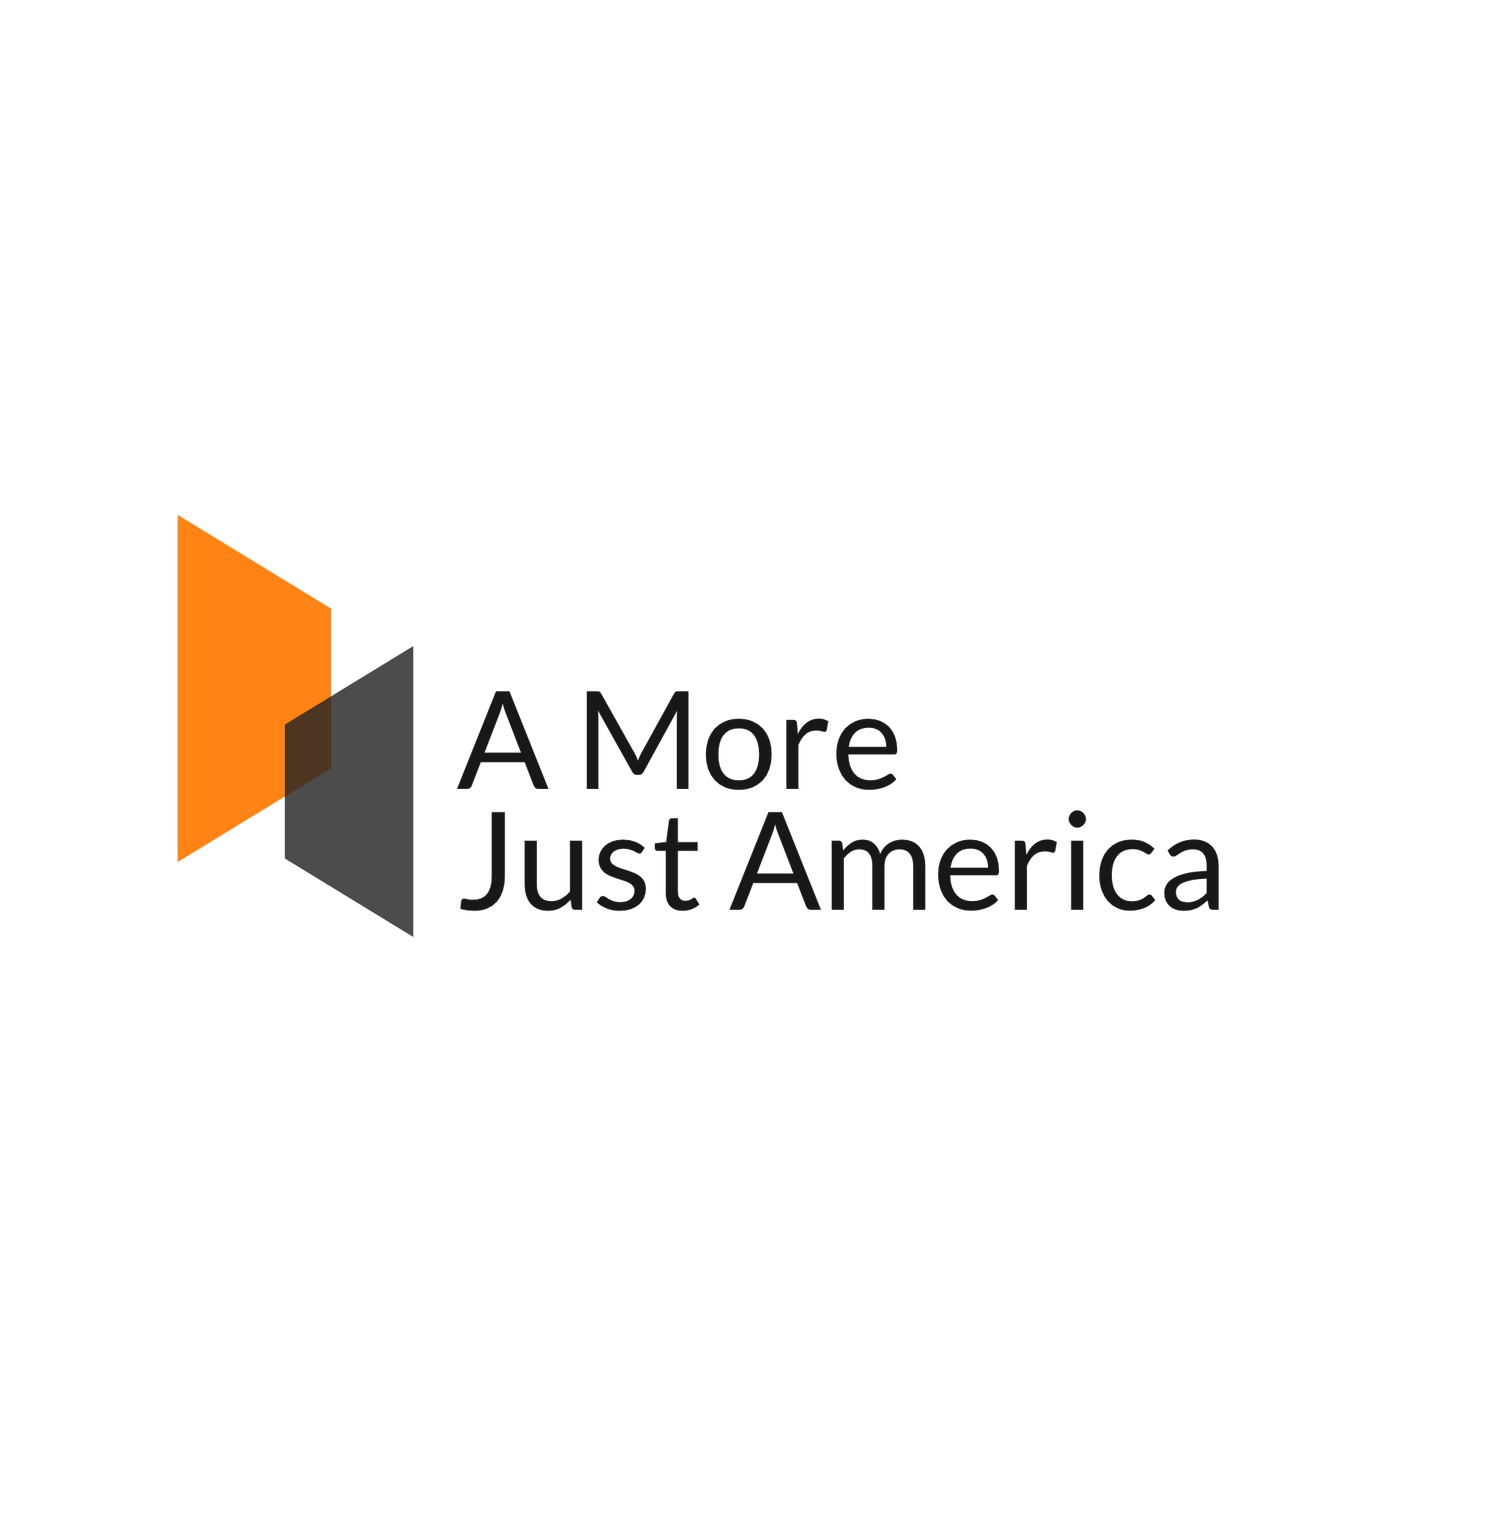 A More Just America Action Fund